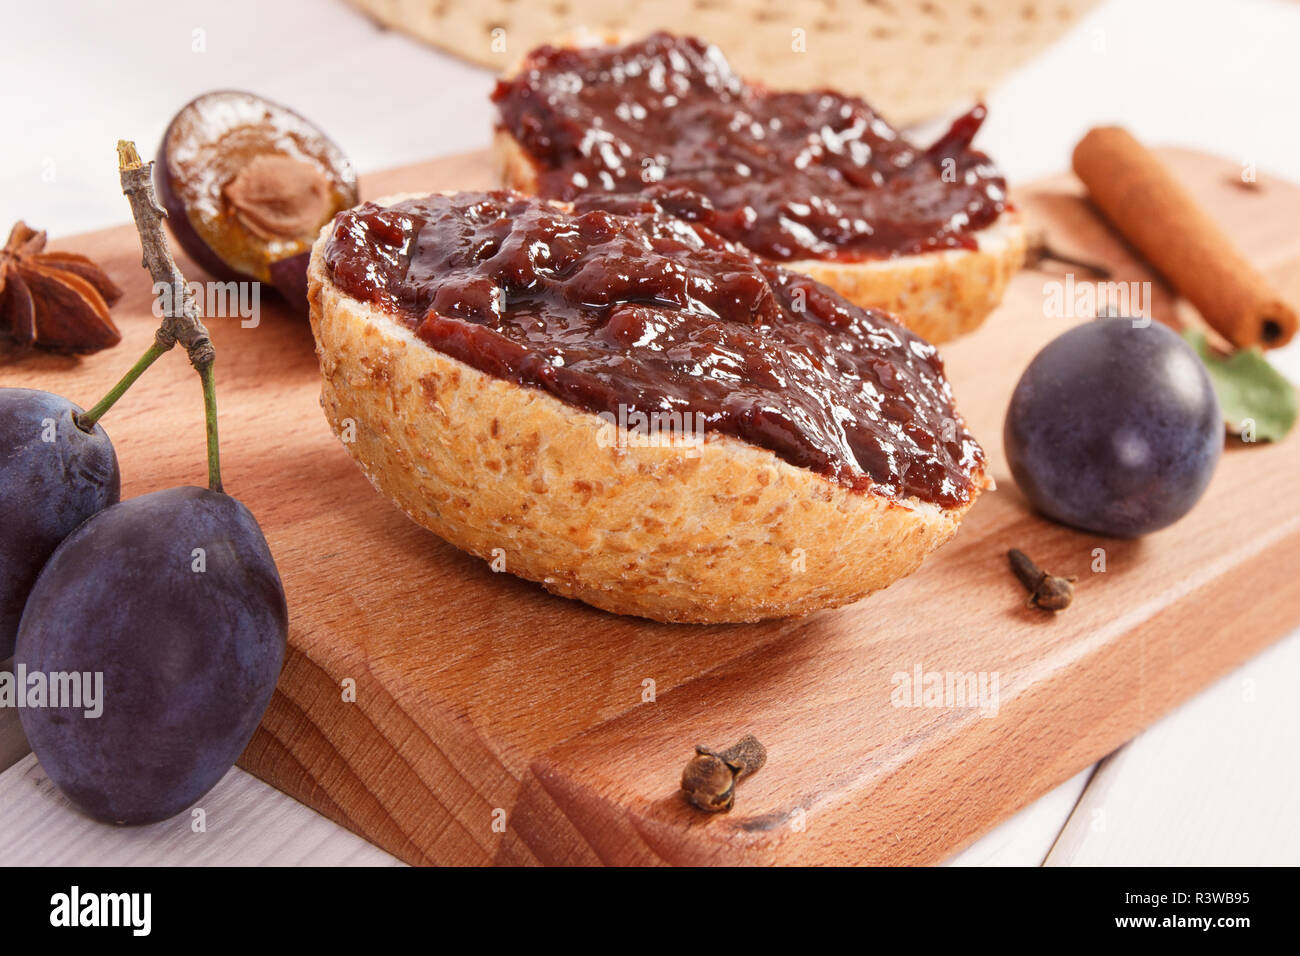 Fresh prepared sandwiches with plum marmalade or jam on wooden cutting board, concept of delicious breakfast Stock Photo